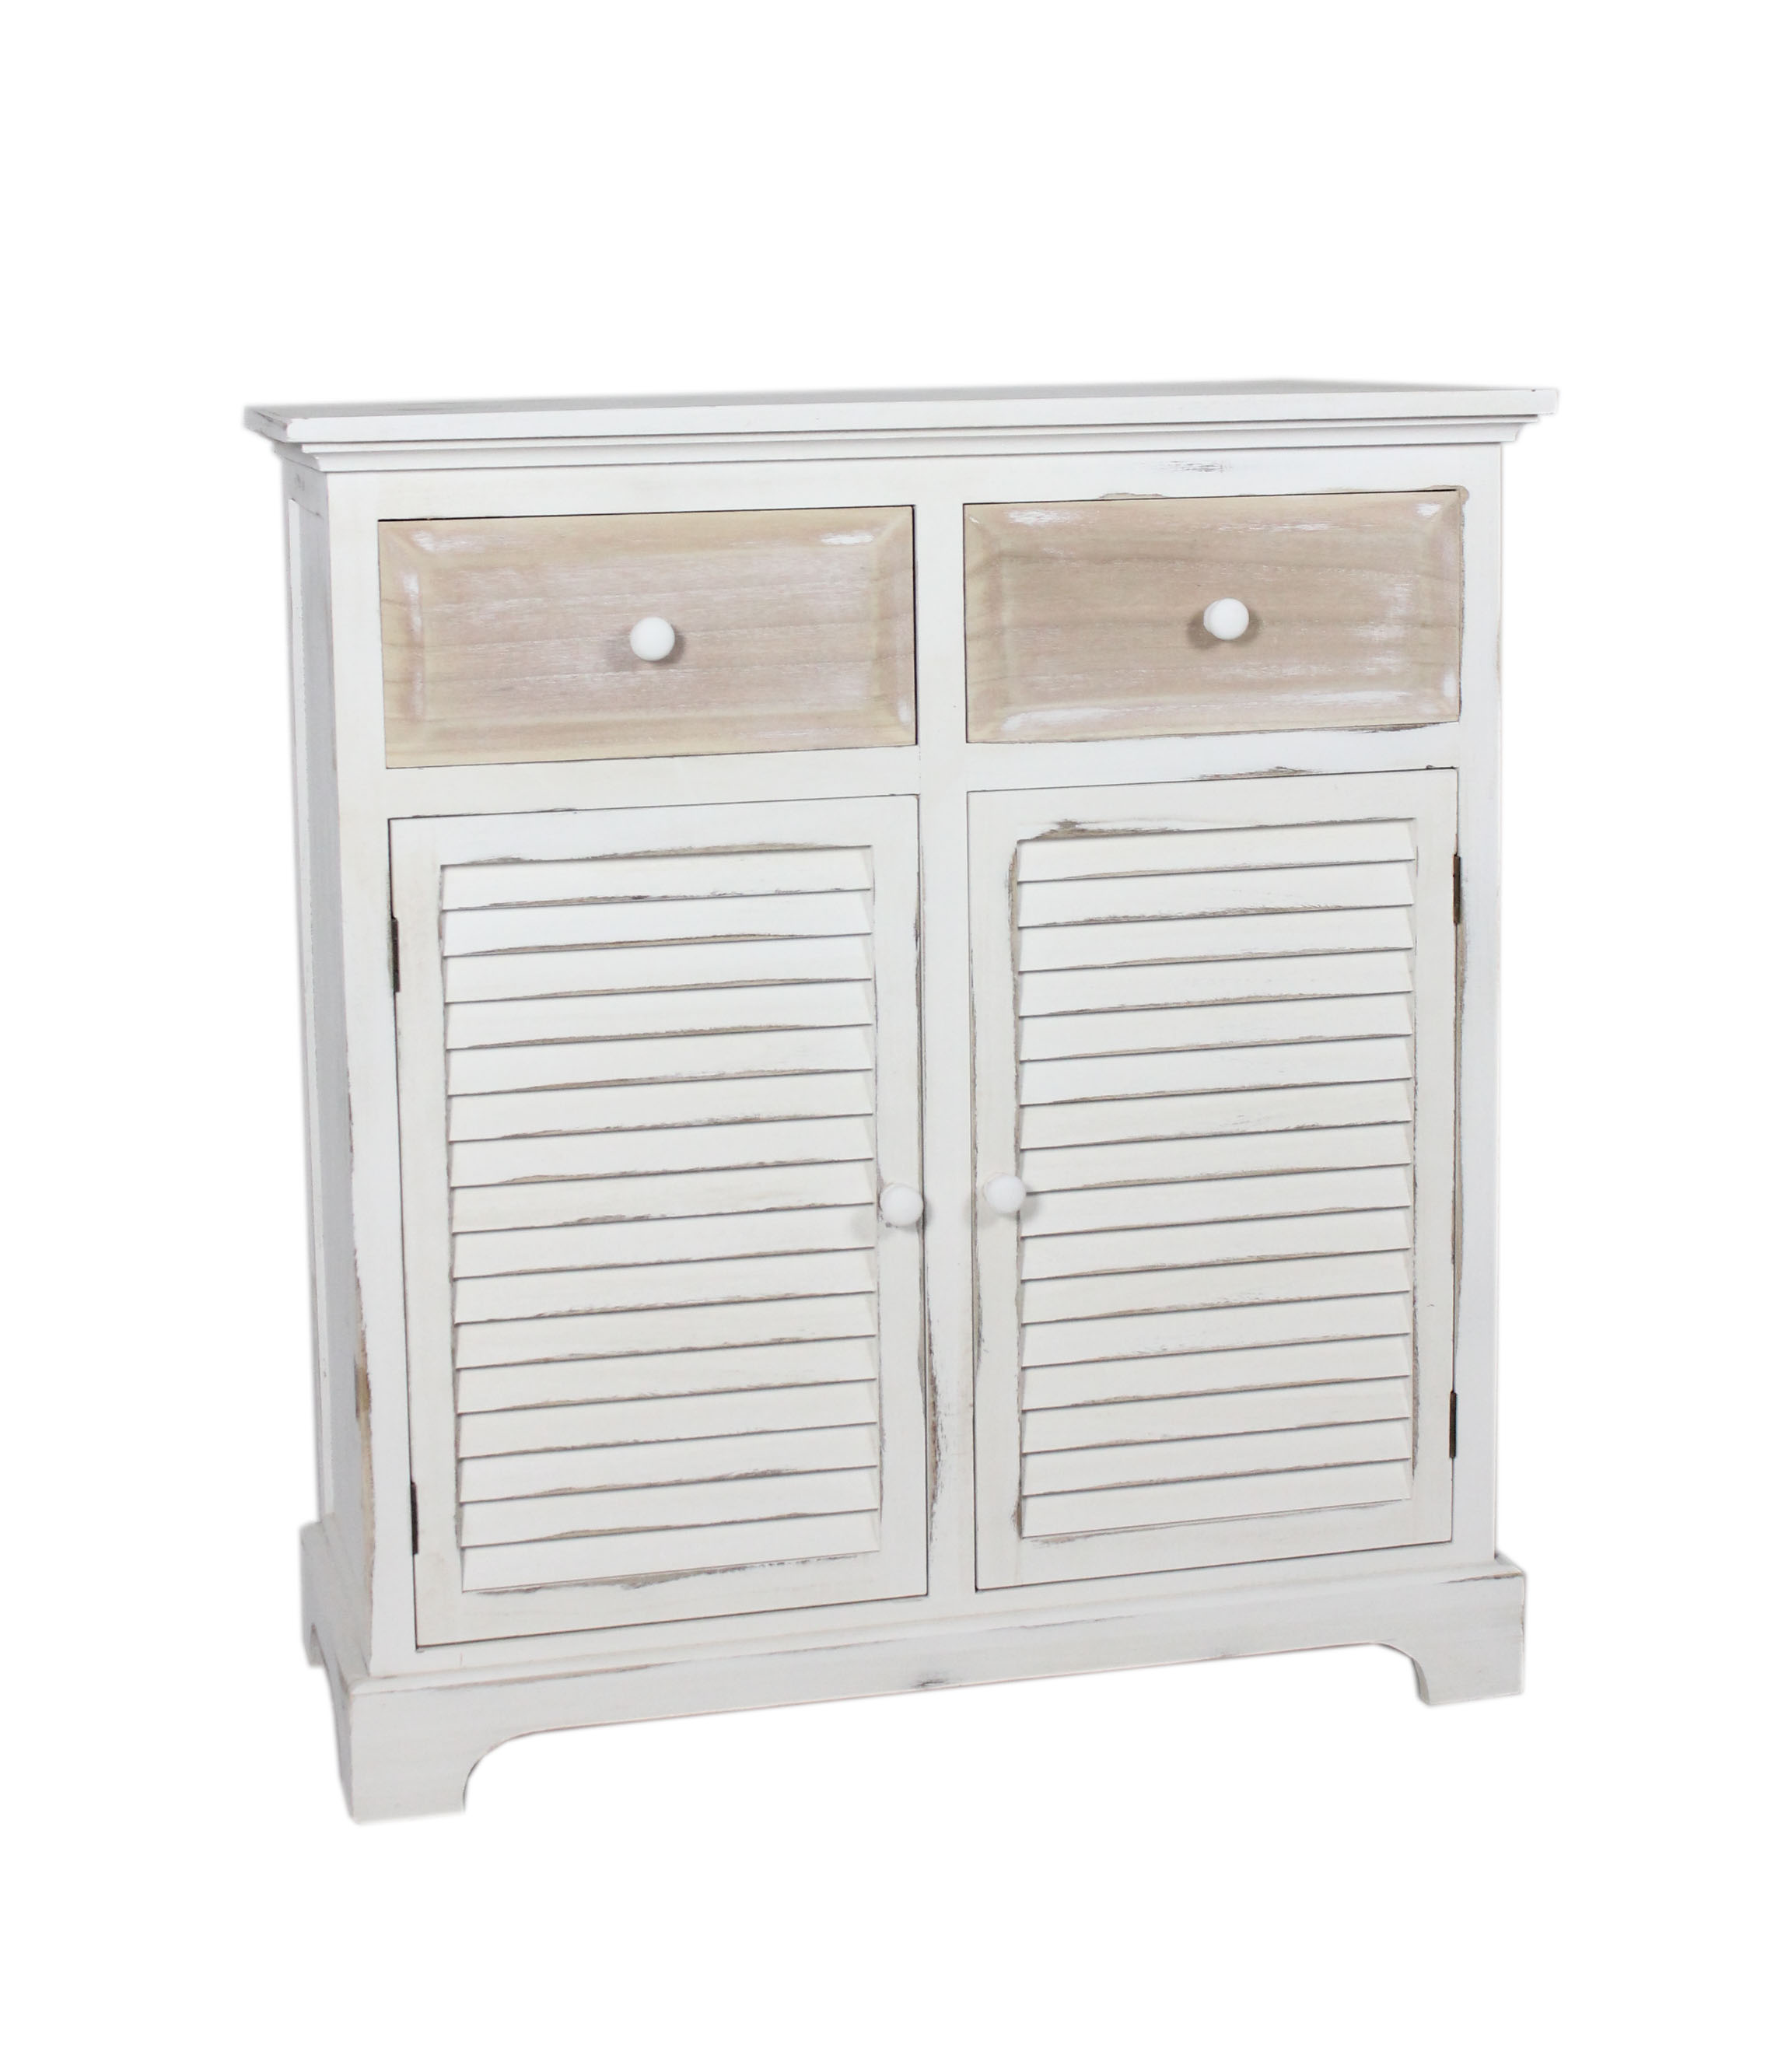 Brush white cabinet with blind door-4288